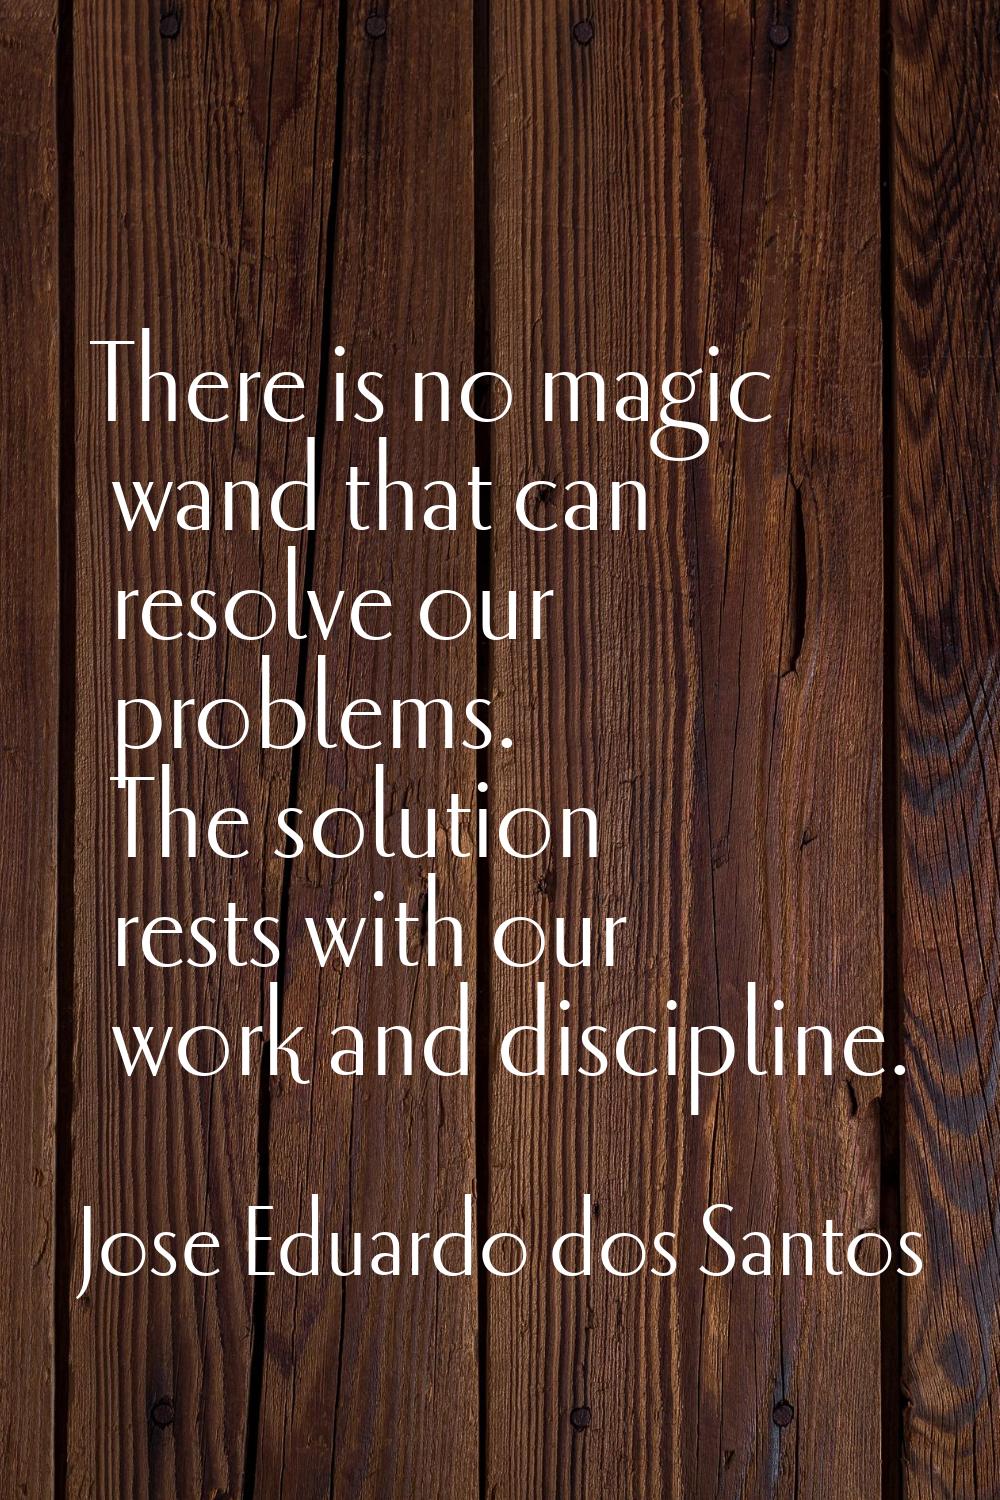 There is no magic wand that can resolve our problems. The solution rests with our work and discipli